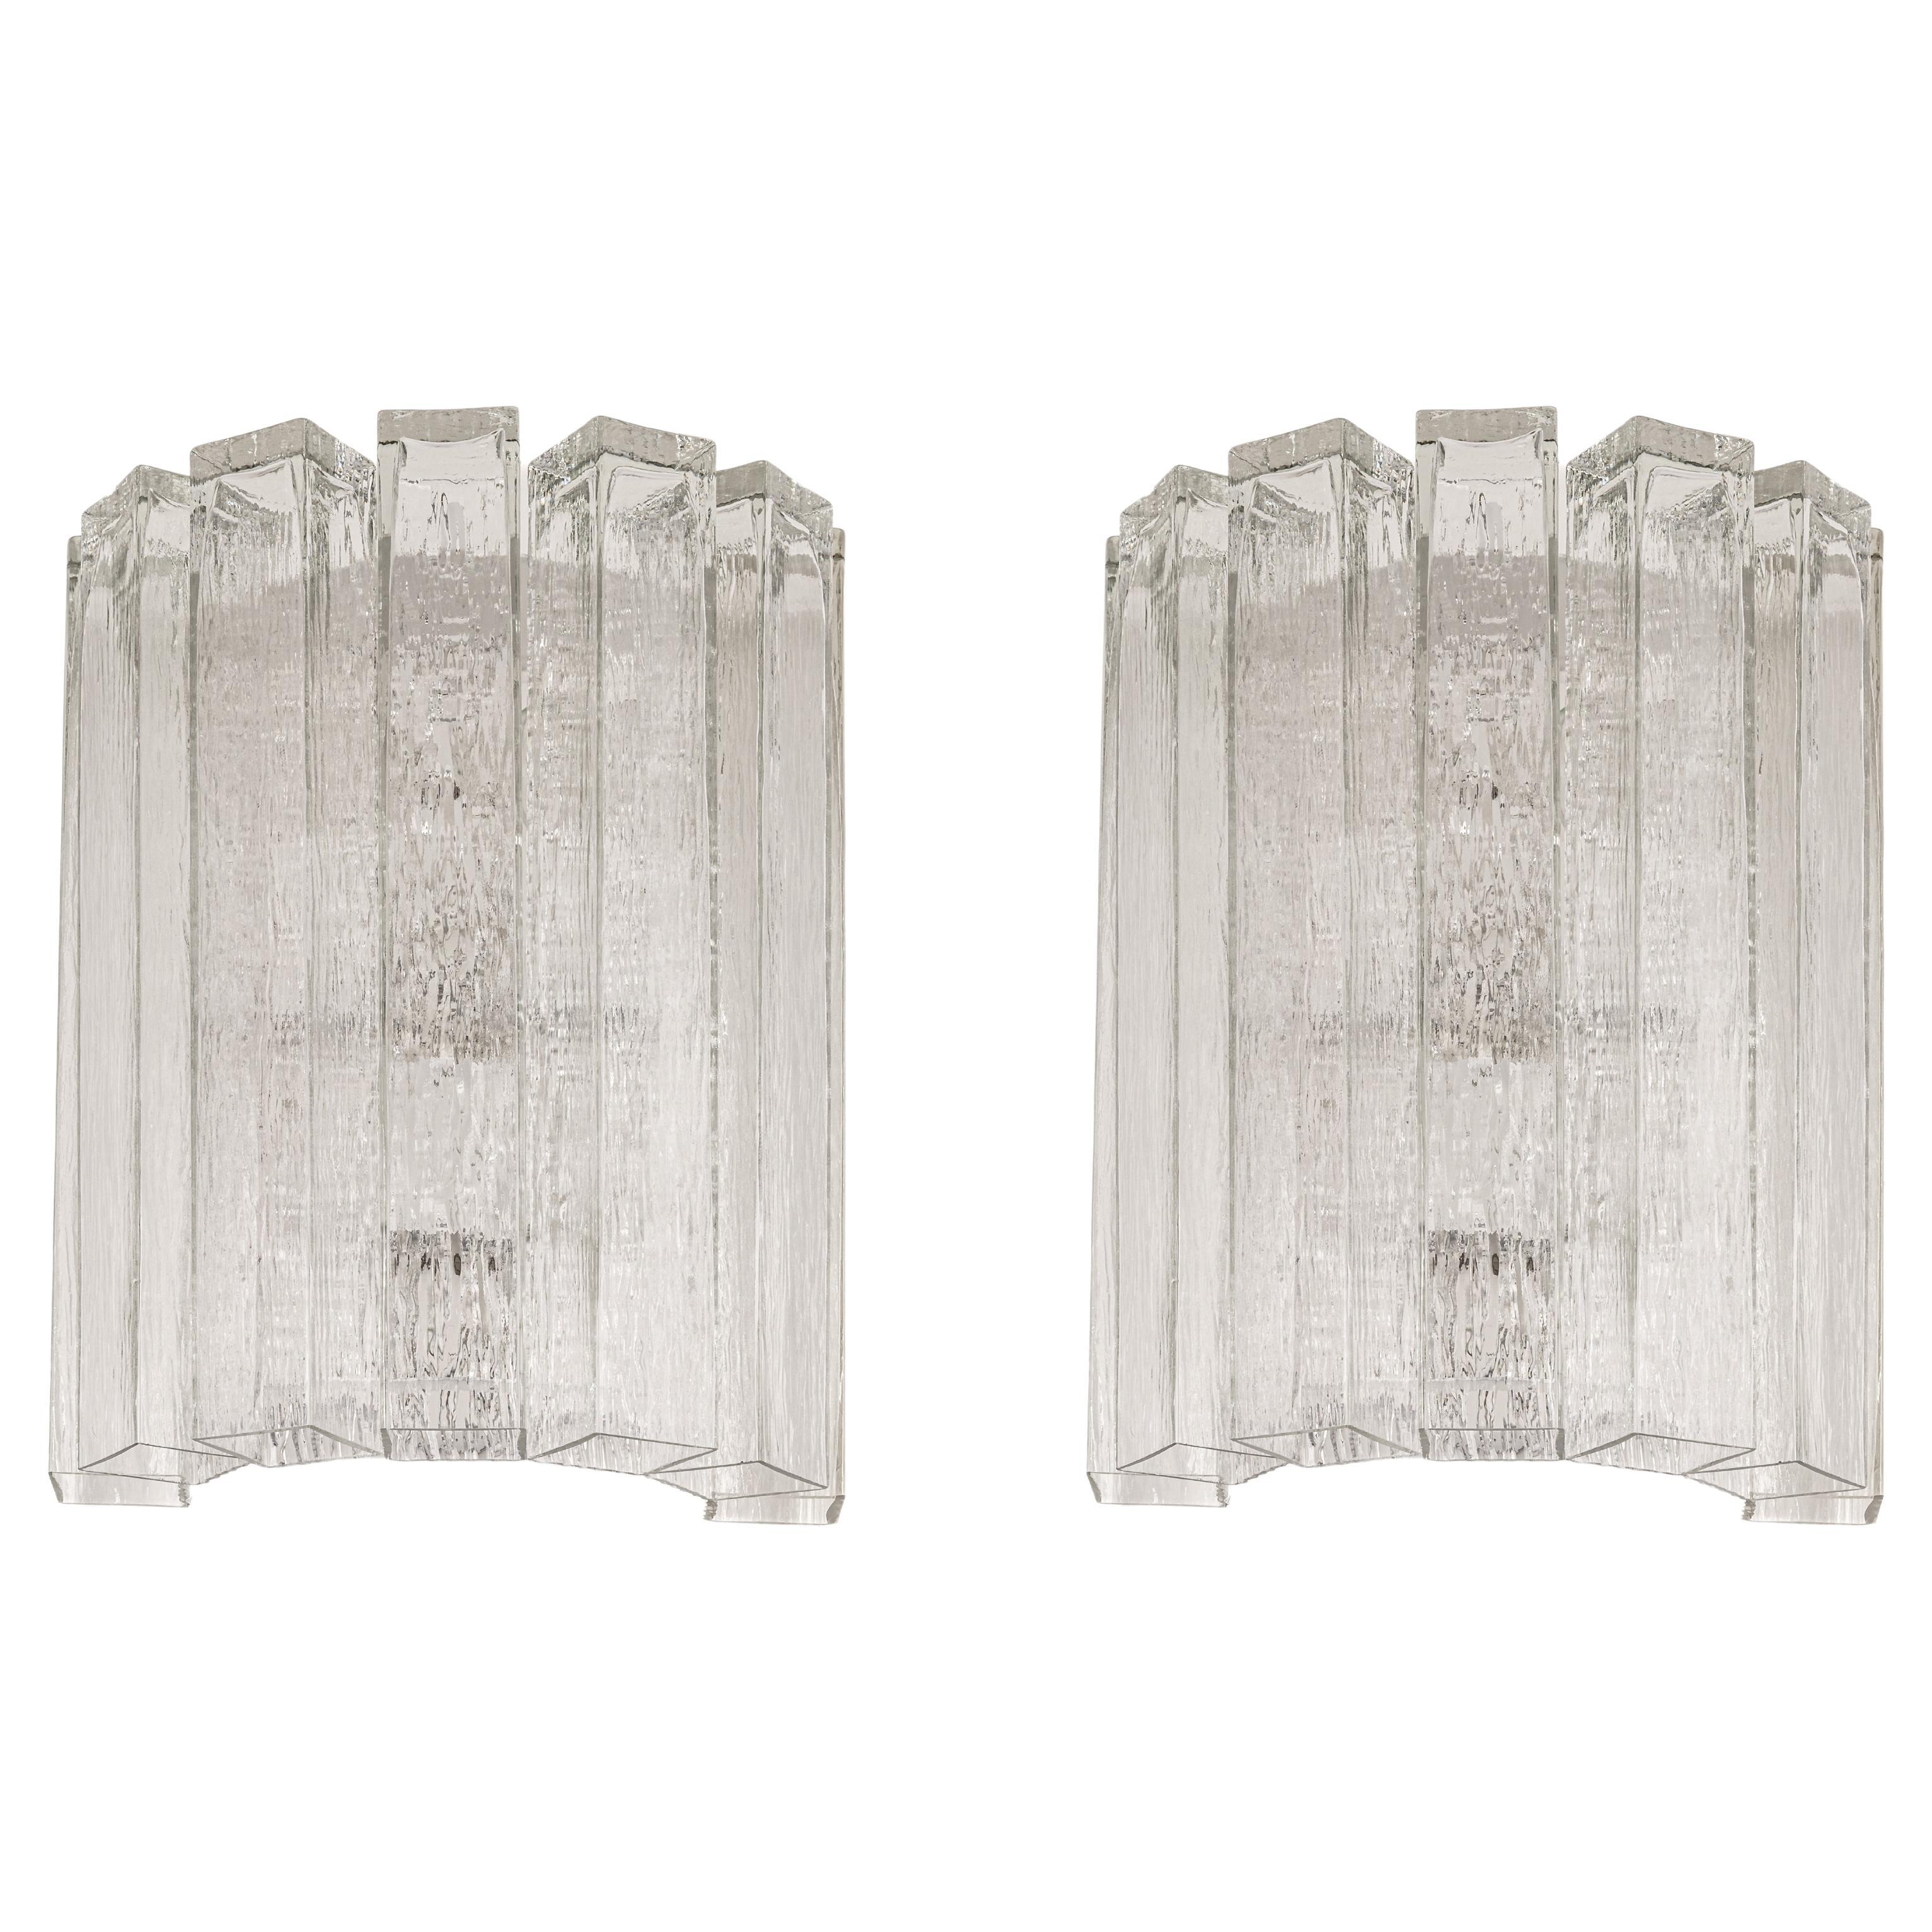 Large Pair of Murano Glass Wall Sconces by Doria, Germany, 1960s